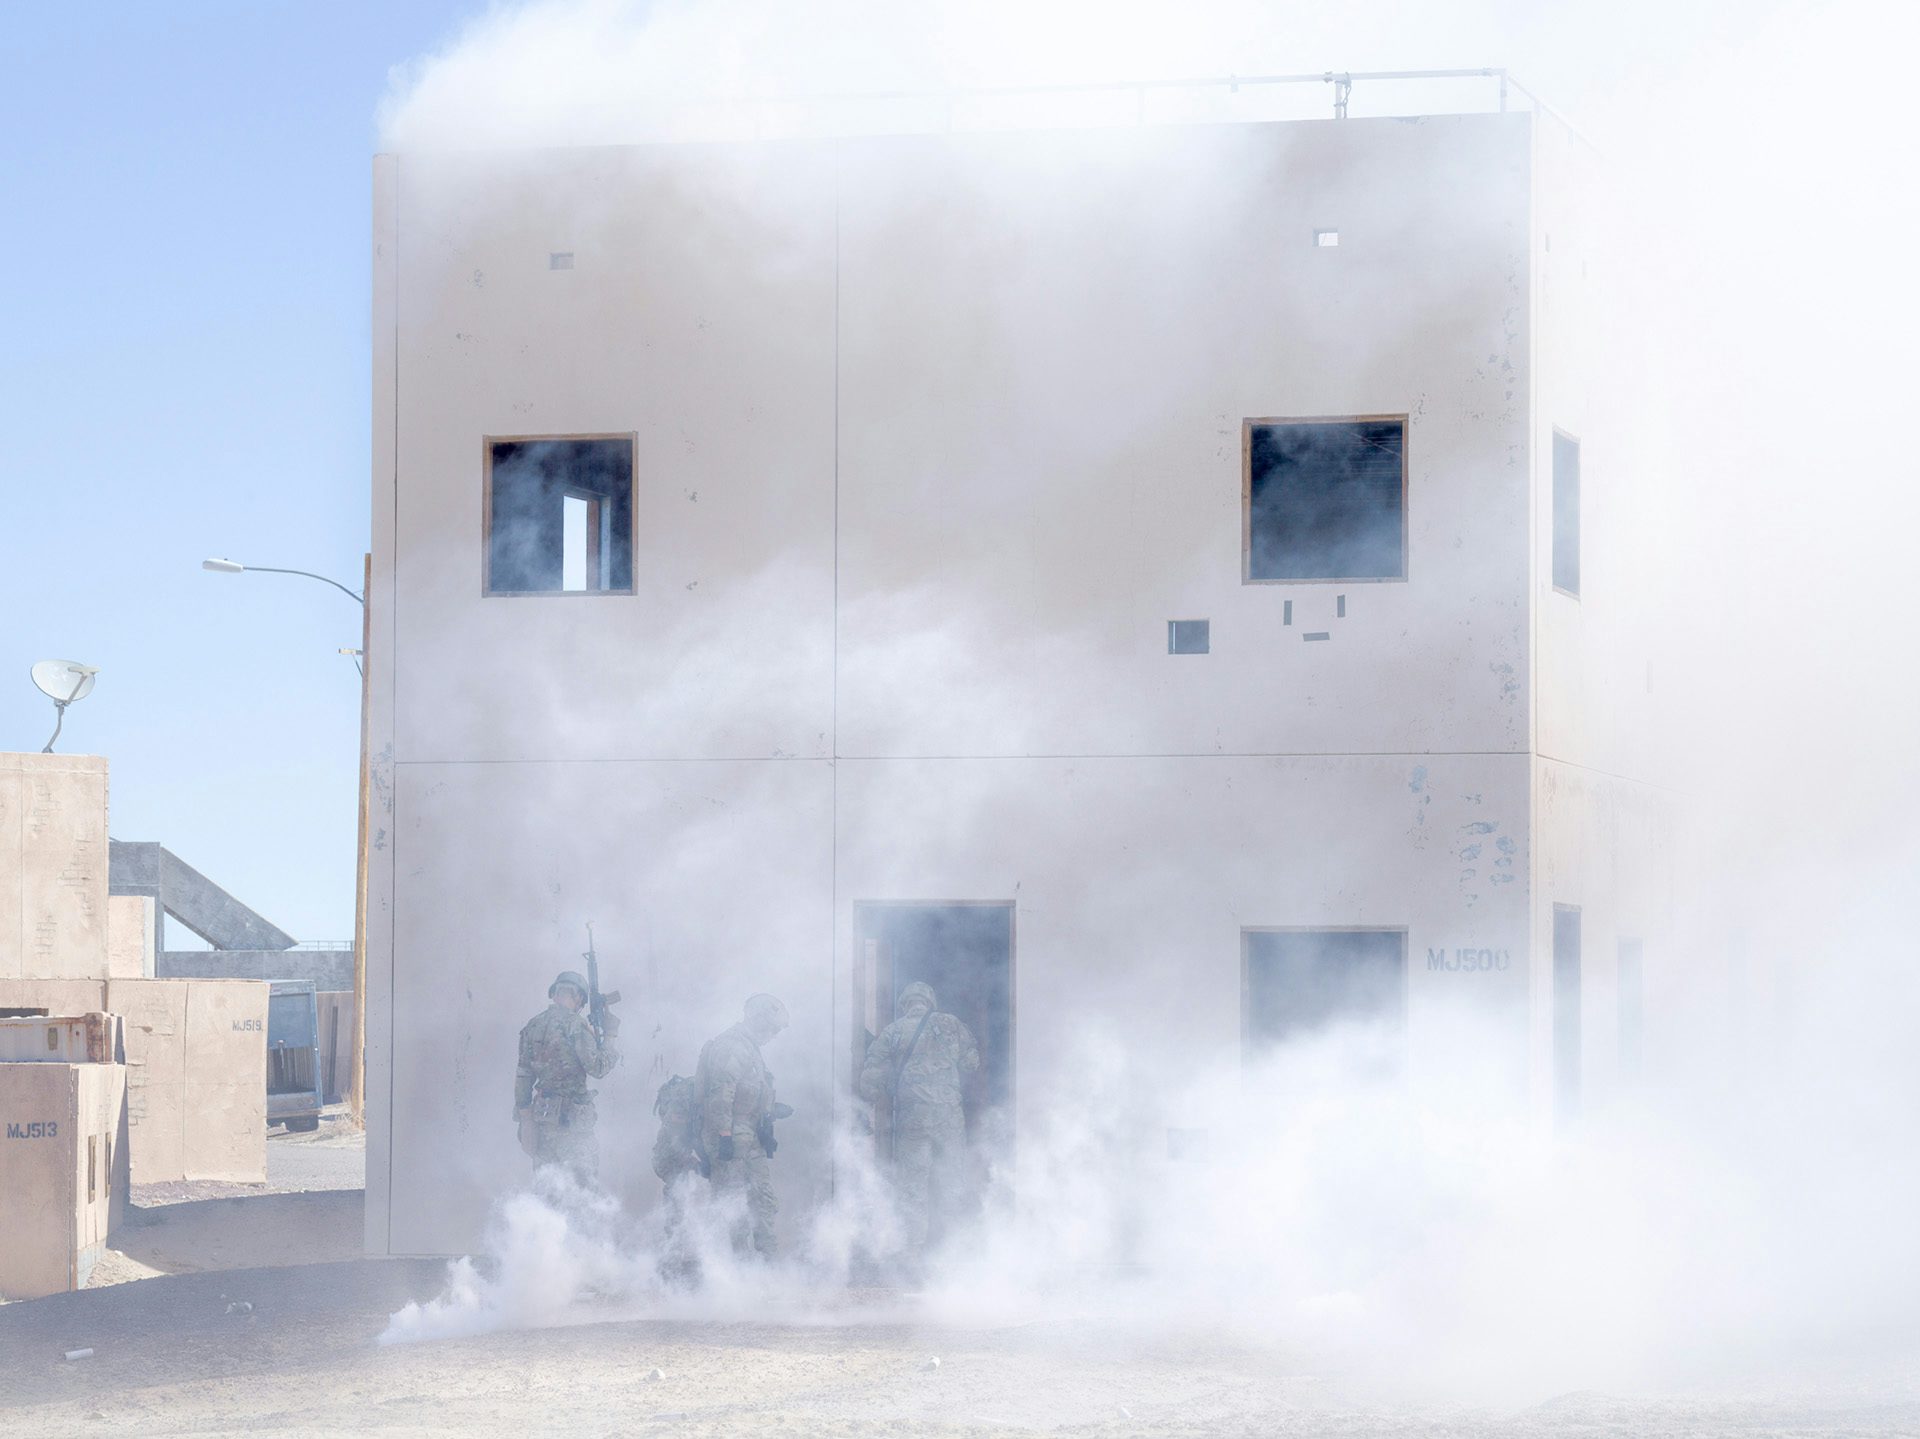 Image from American Glitch by Andrea Orejarena and Caleb Stein showing the frontage of a house in an Iraqi village simulation shrouded in smoke